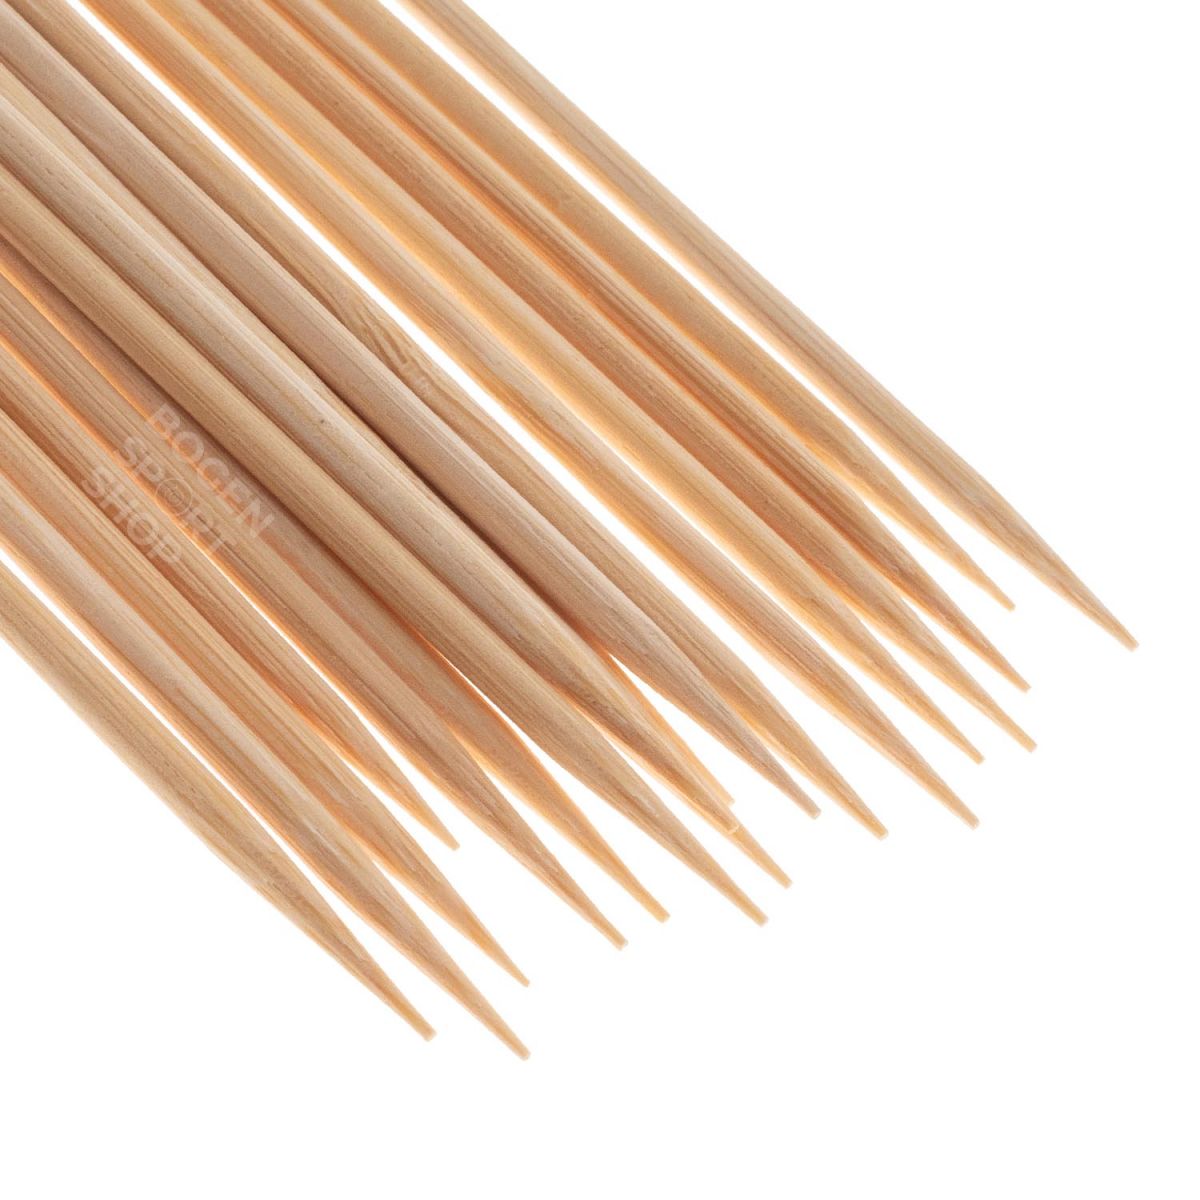 Alexbow Blowgun Bamboo Shafts 3 mm Pointed (50 Pcs.)